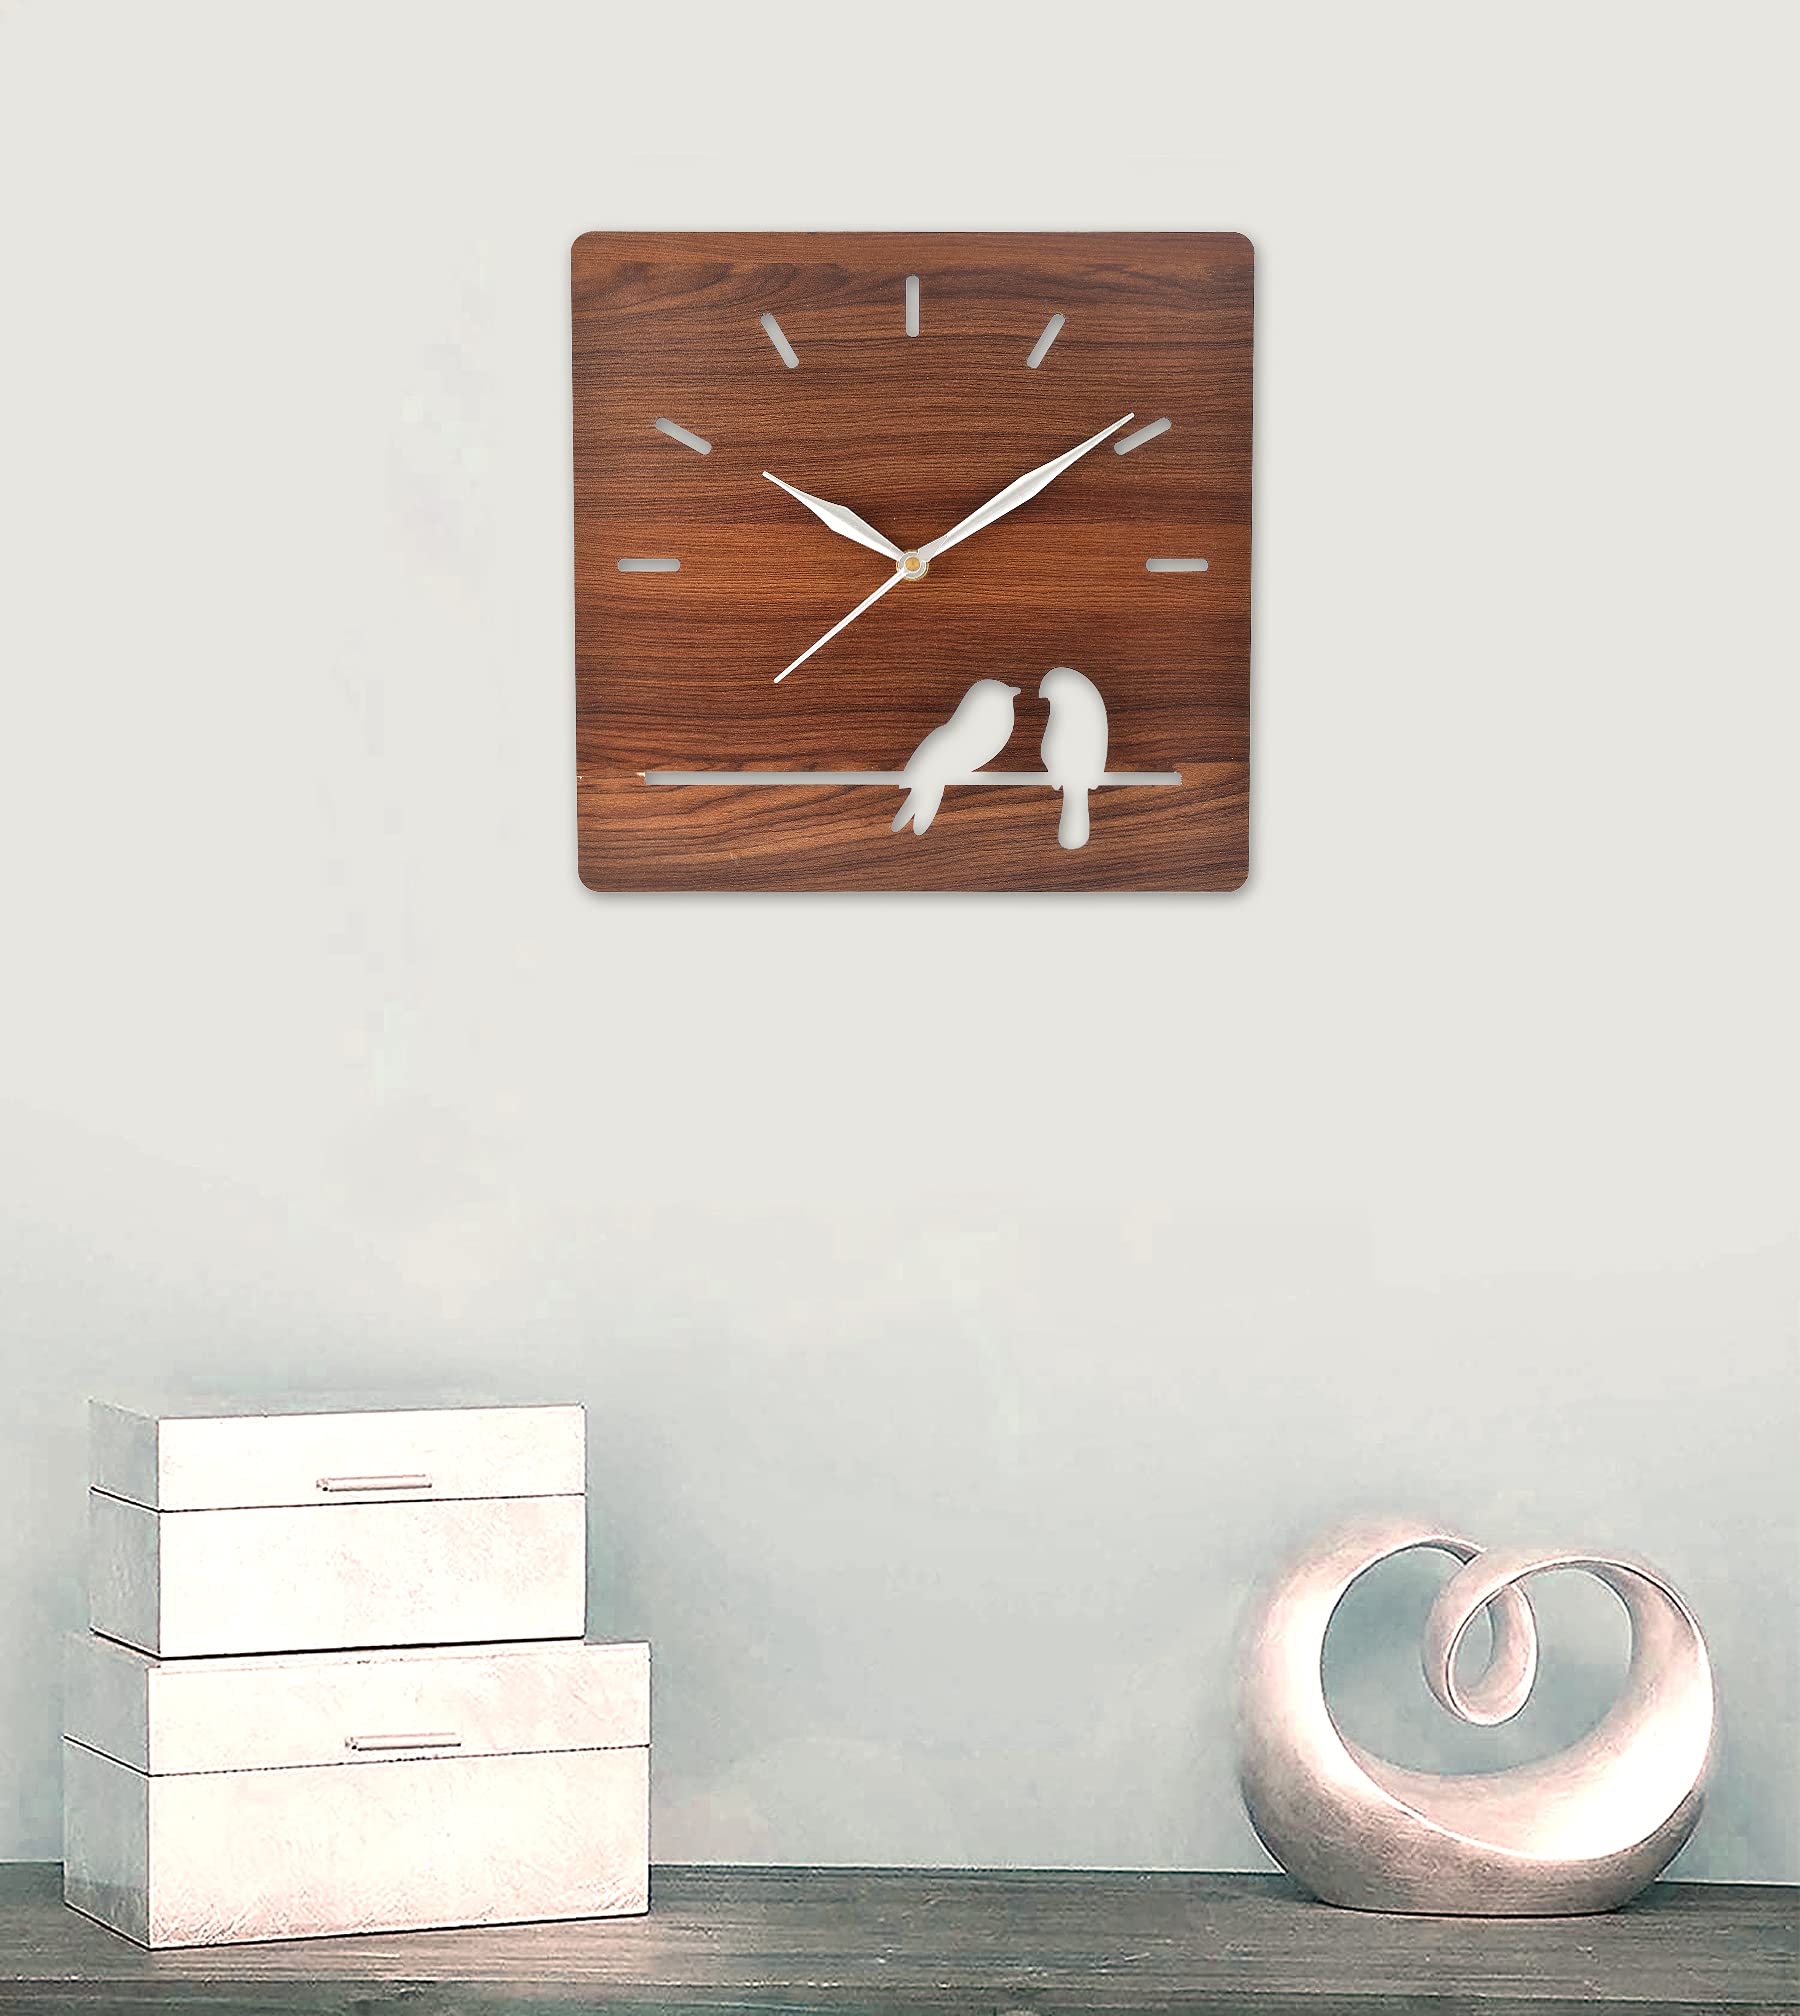 Heart Home Designer Square Shaped Wooden Wall Clock (Brown)-HS43HEARTH26736